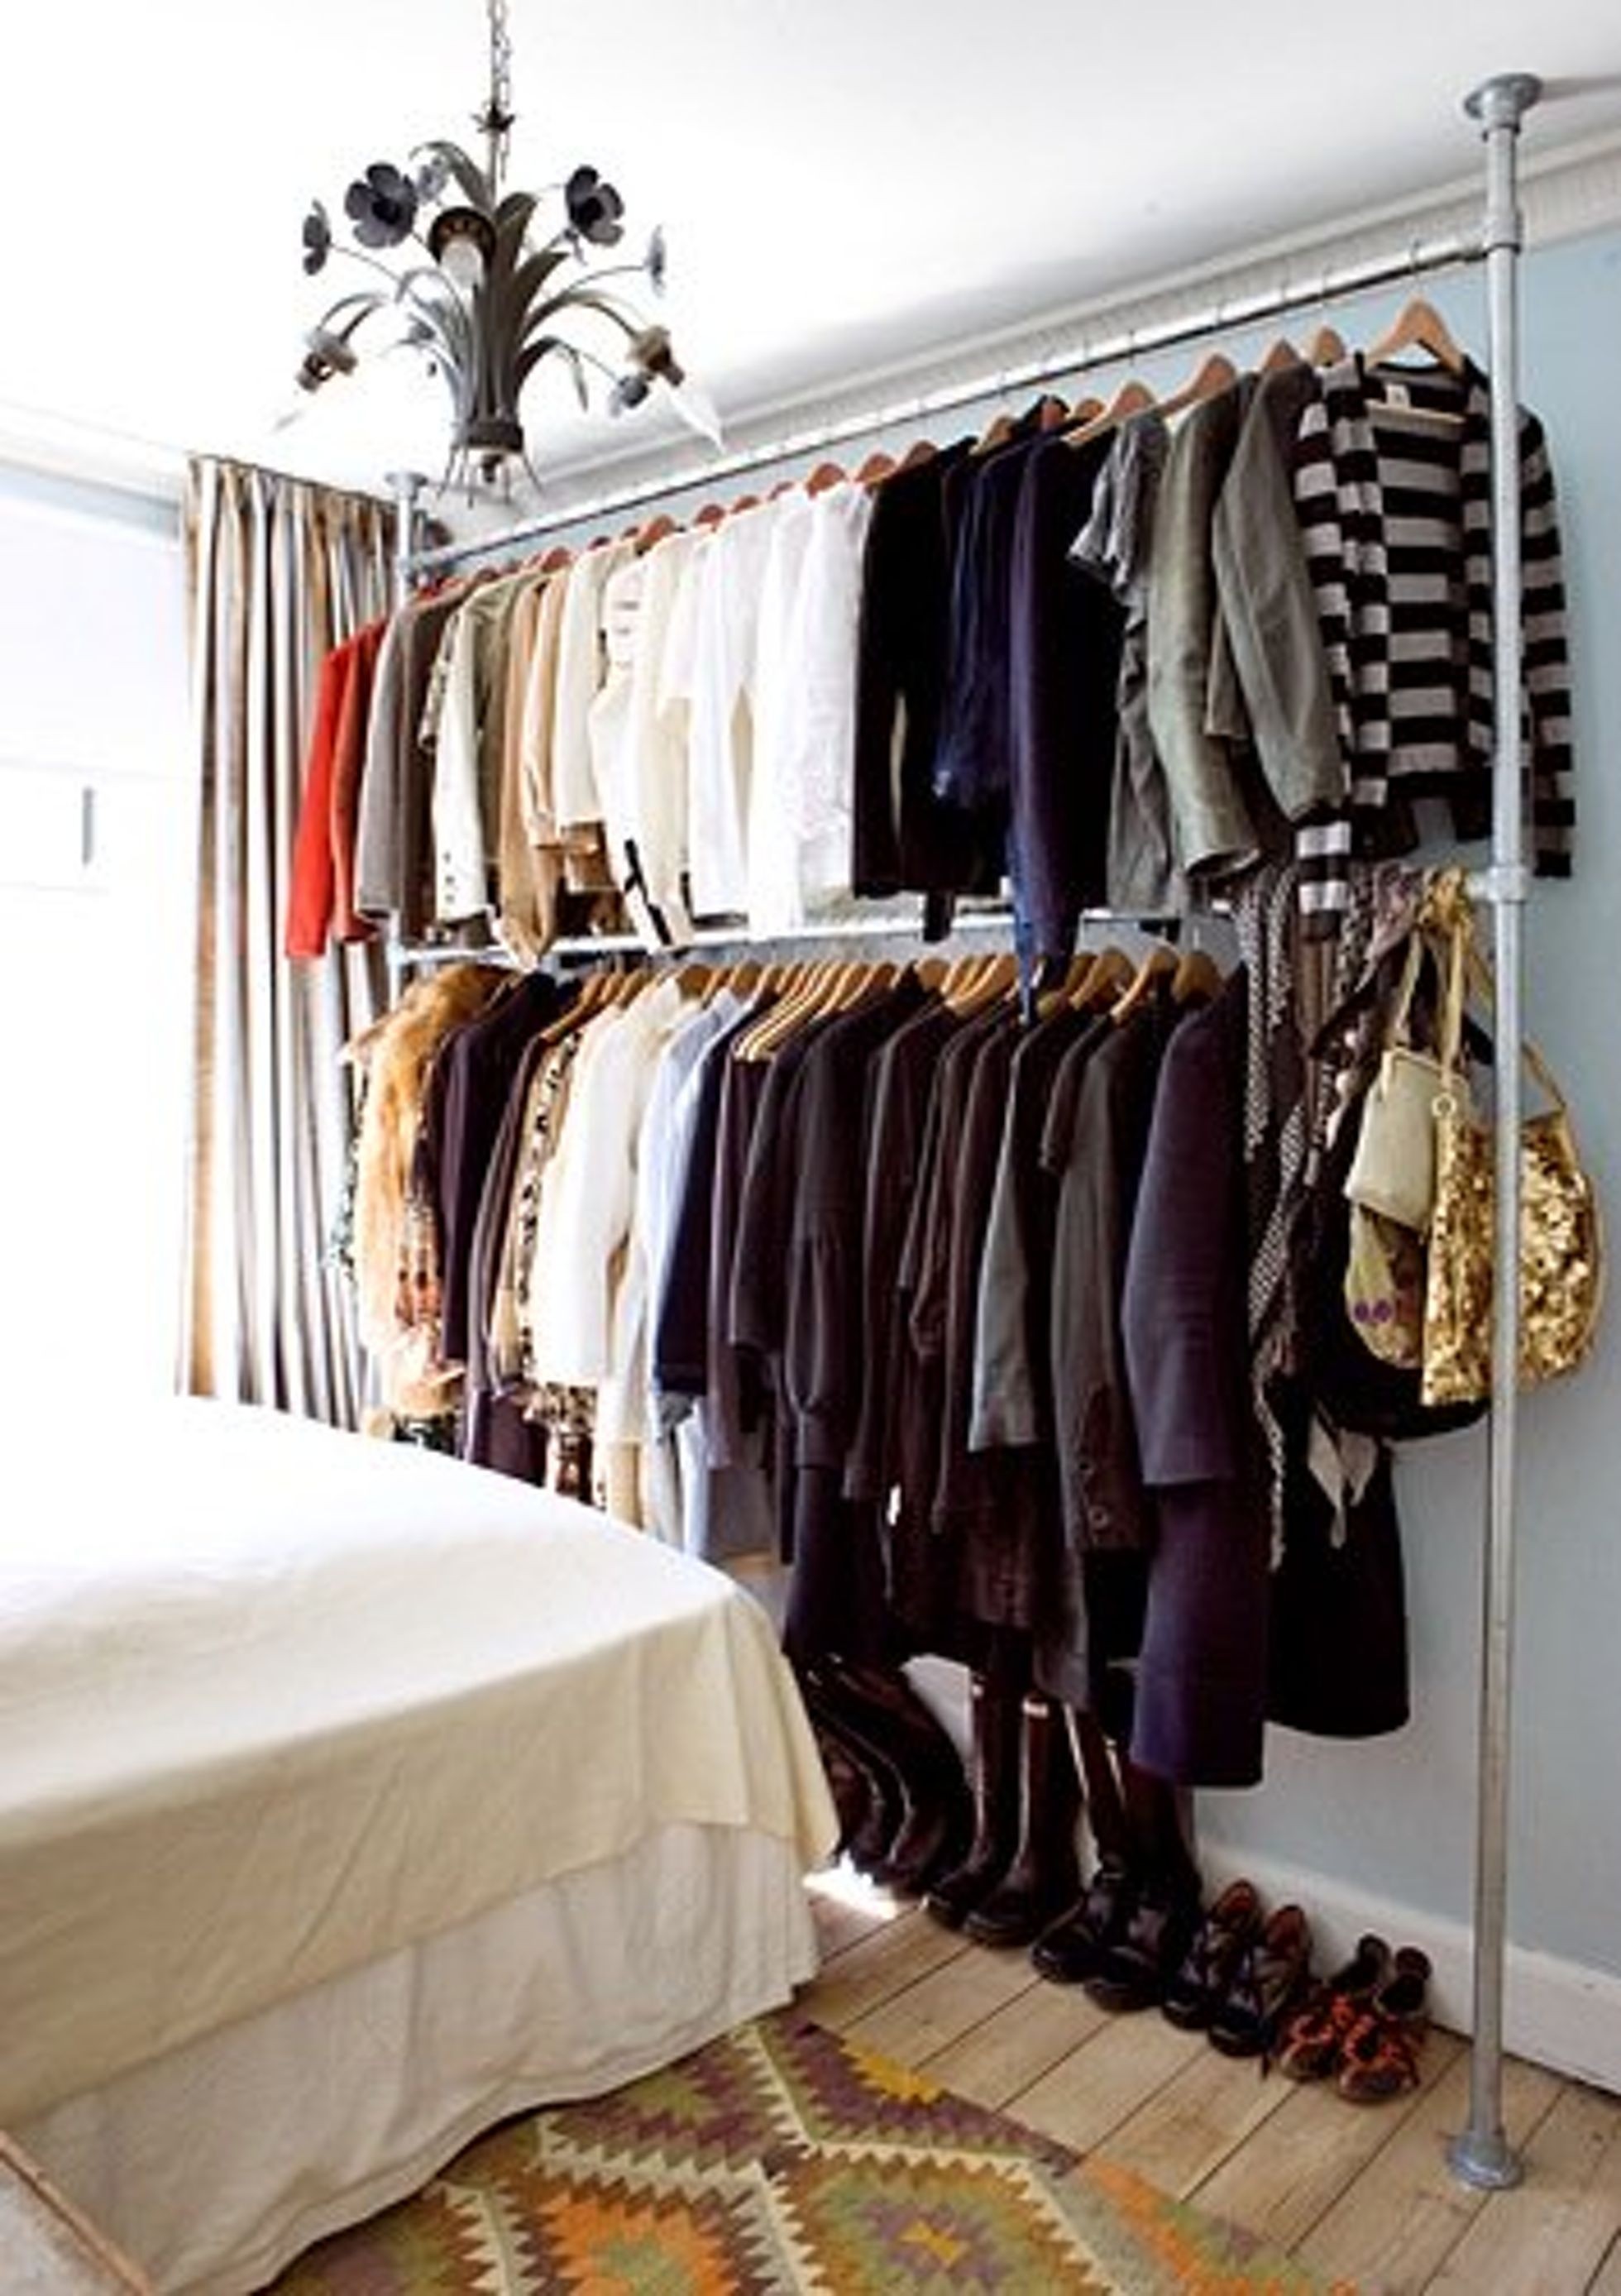 Wardrobe closet for hanging clothes 3